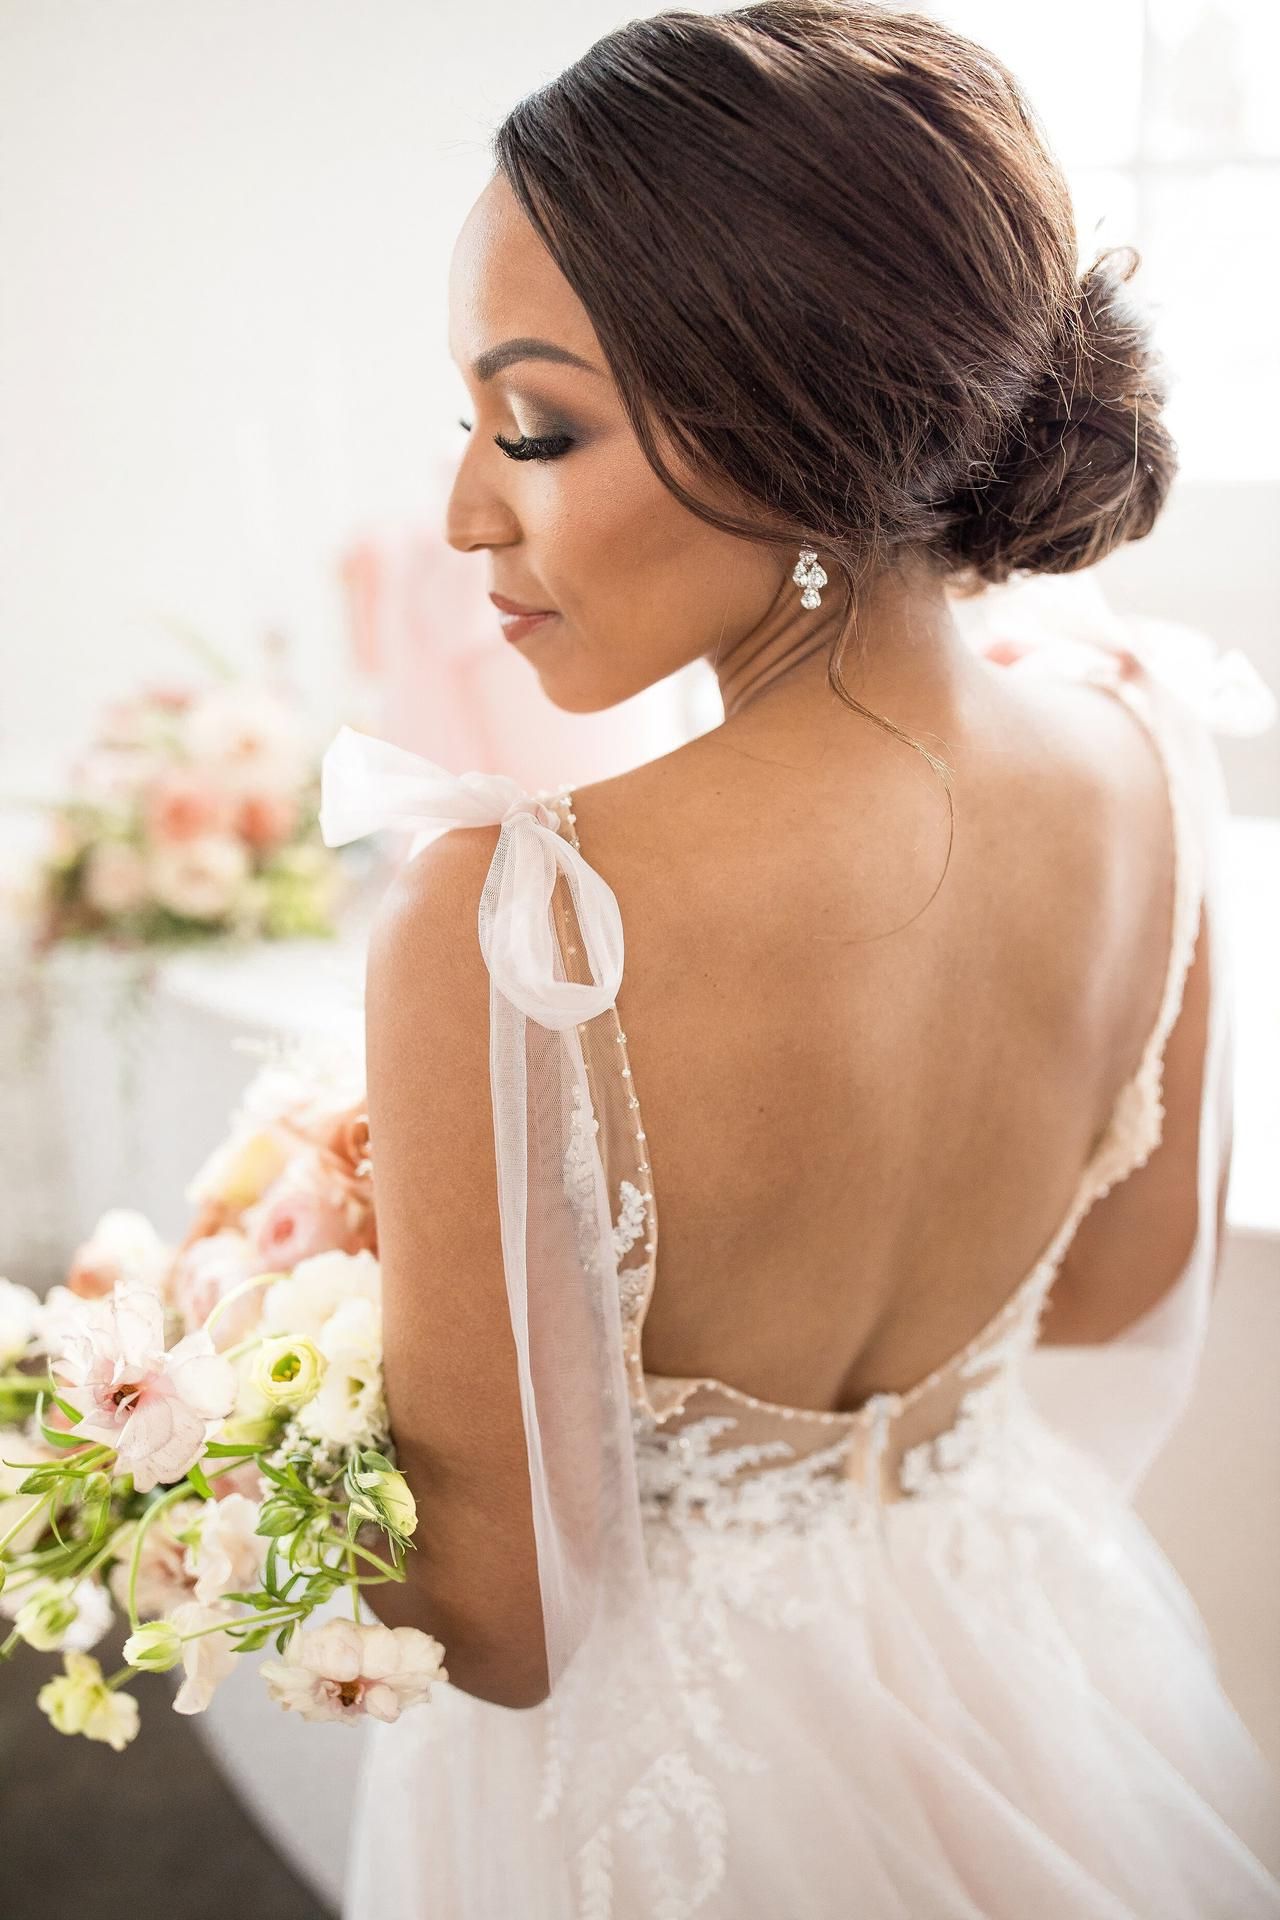 40 Wedding Hairstyles For Long Hair: Bridal Updos, Veils & More Pertaining To Most Current Low Flower Bun For Long Hair (Gallery 13 of 15)